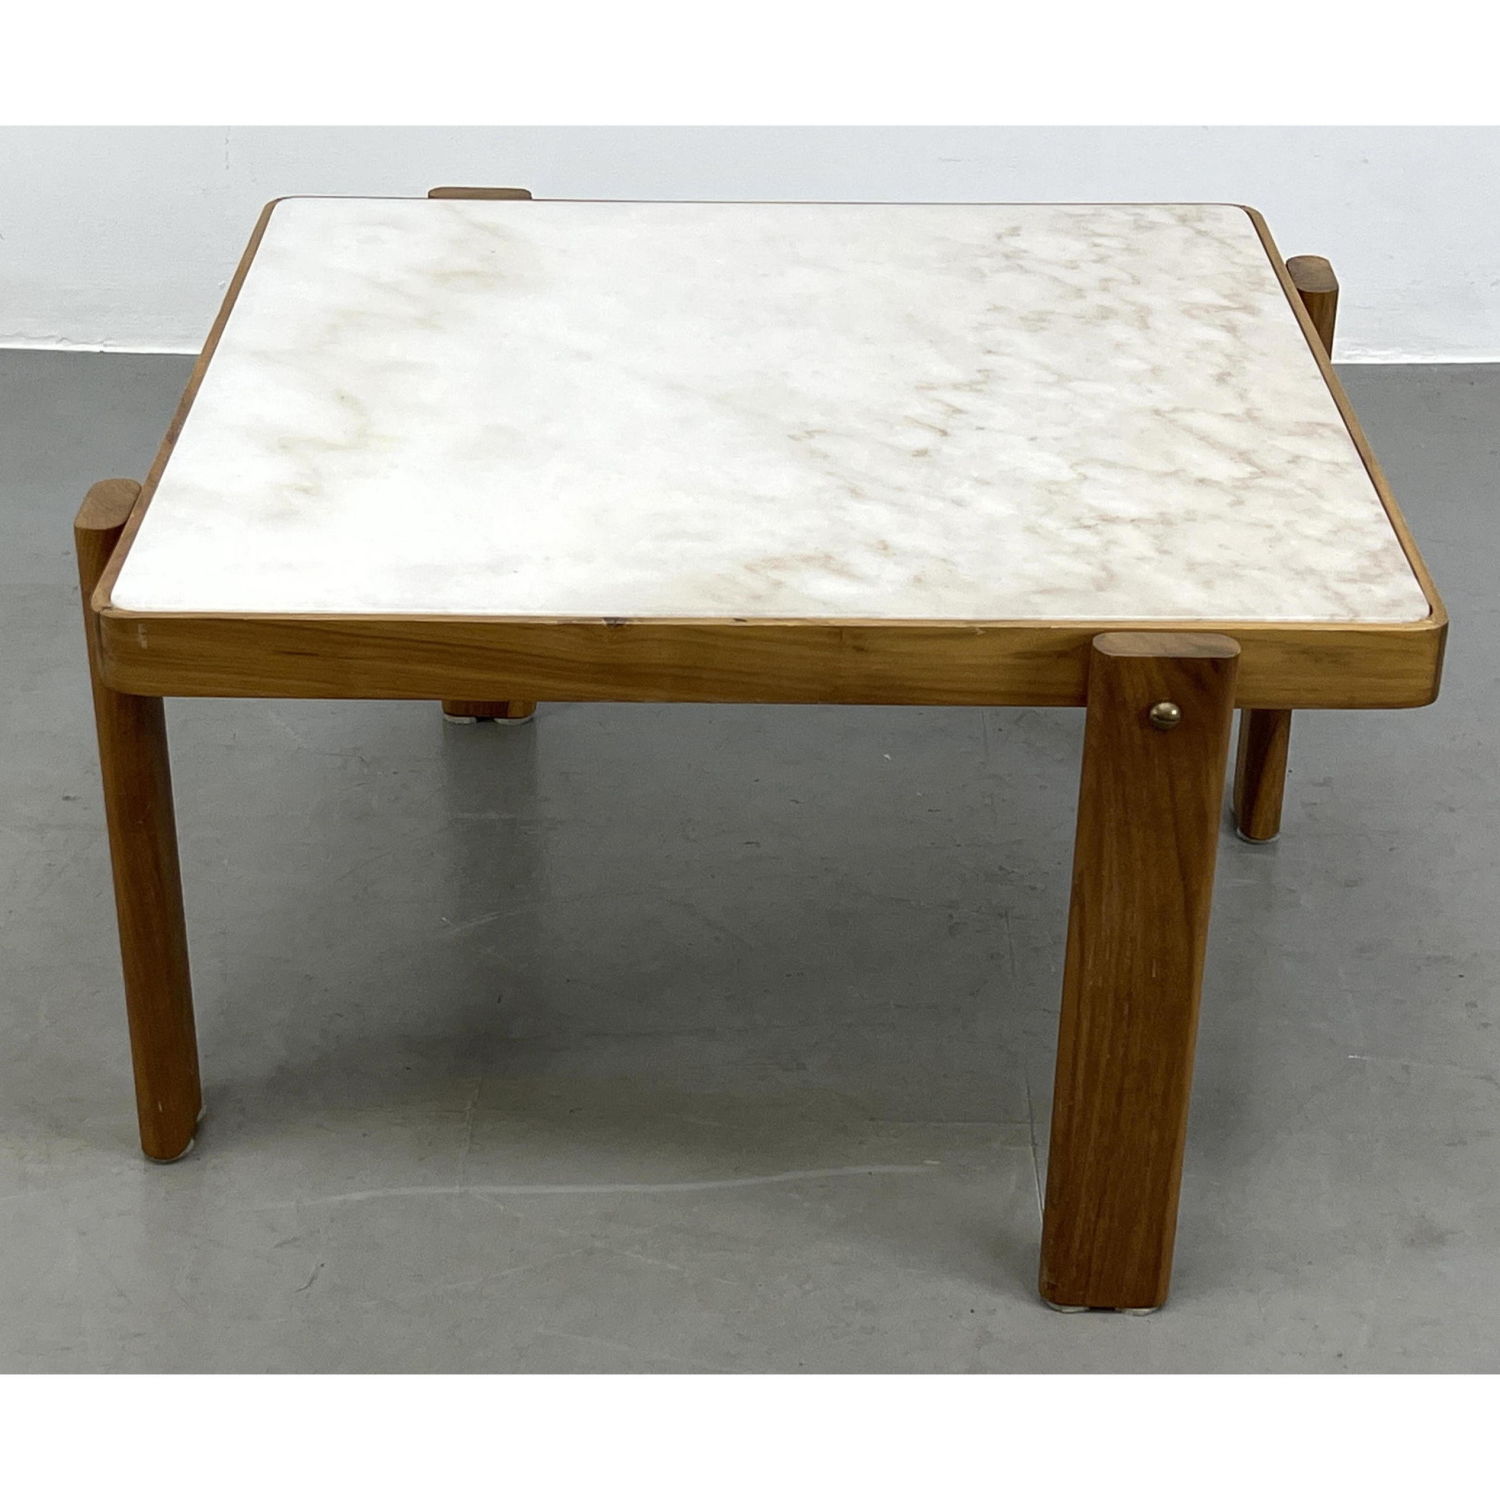 Small Occasional Side Table with